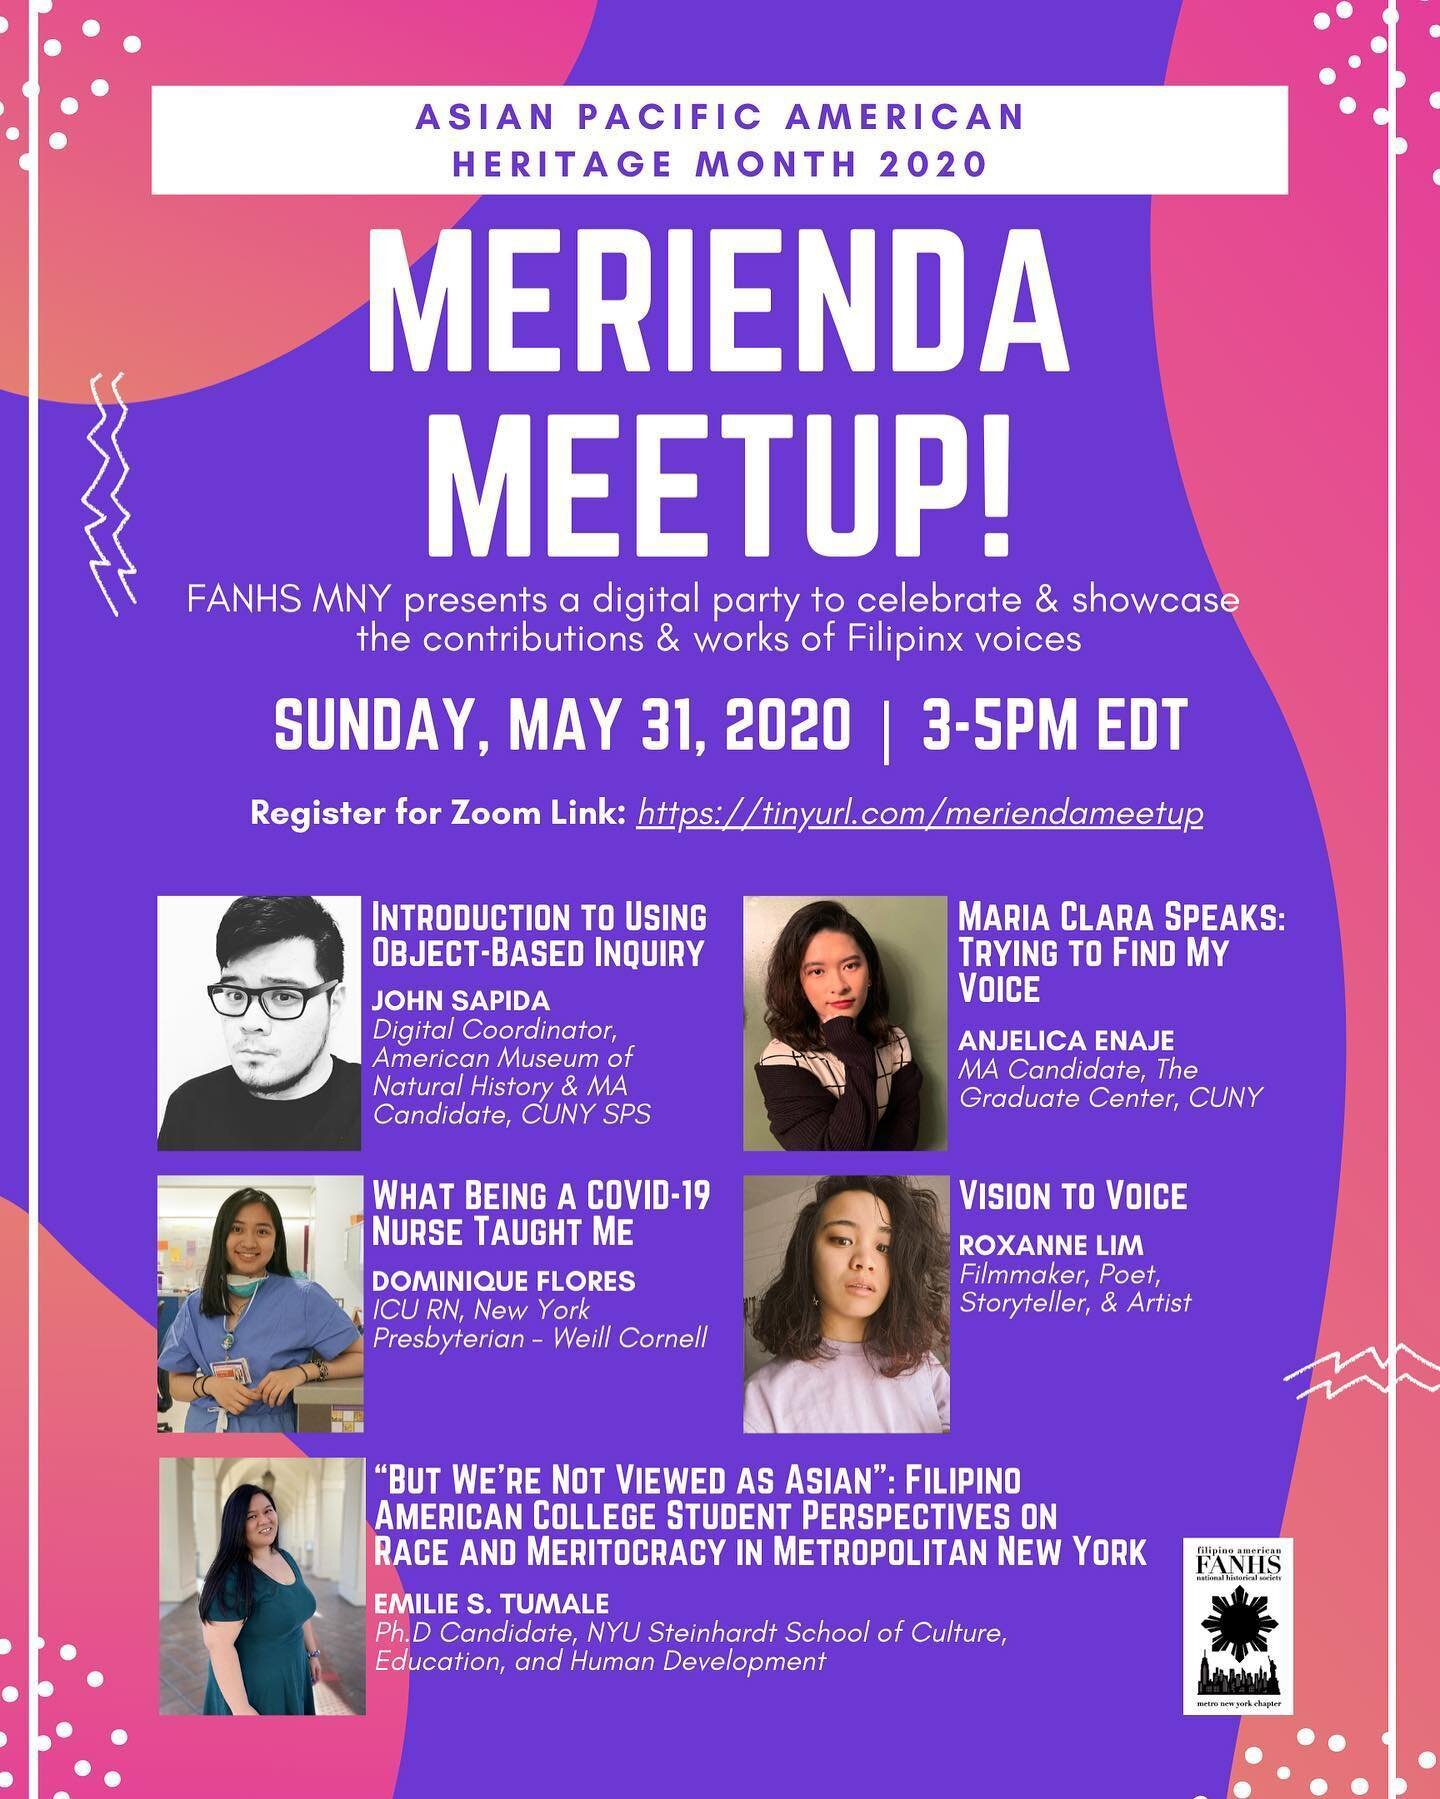 We are so excited to announce the speakers for our #MeriendaMeetup on May 31! Register to receive the Zoom link the day of, and join us in celebrating some incredible Filipinx voices for #APAHM2020 !